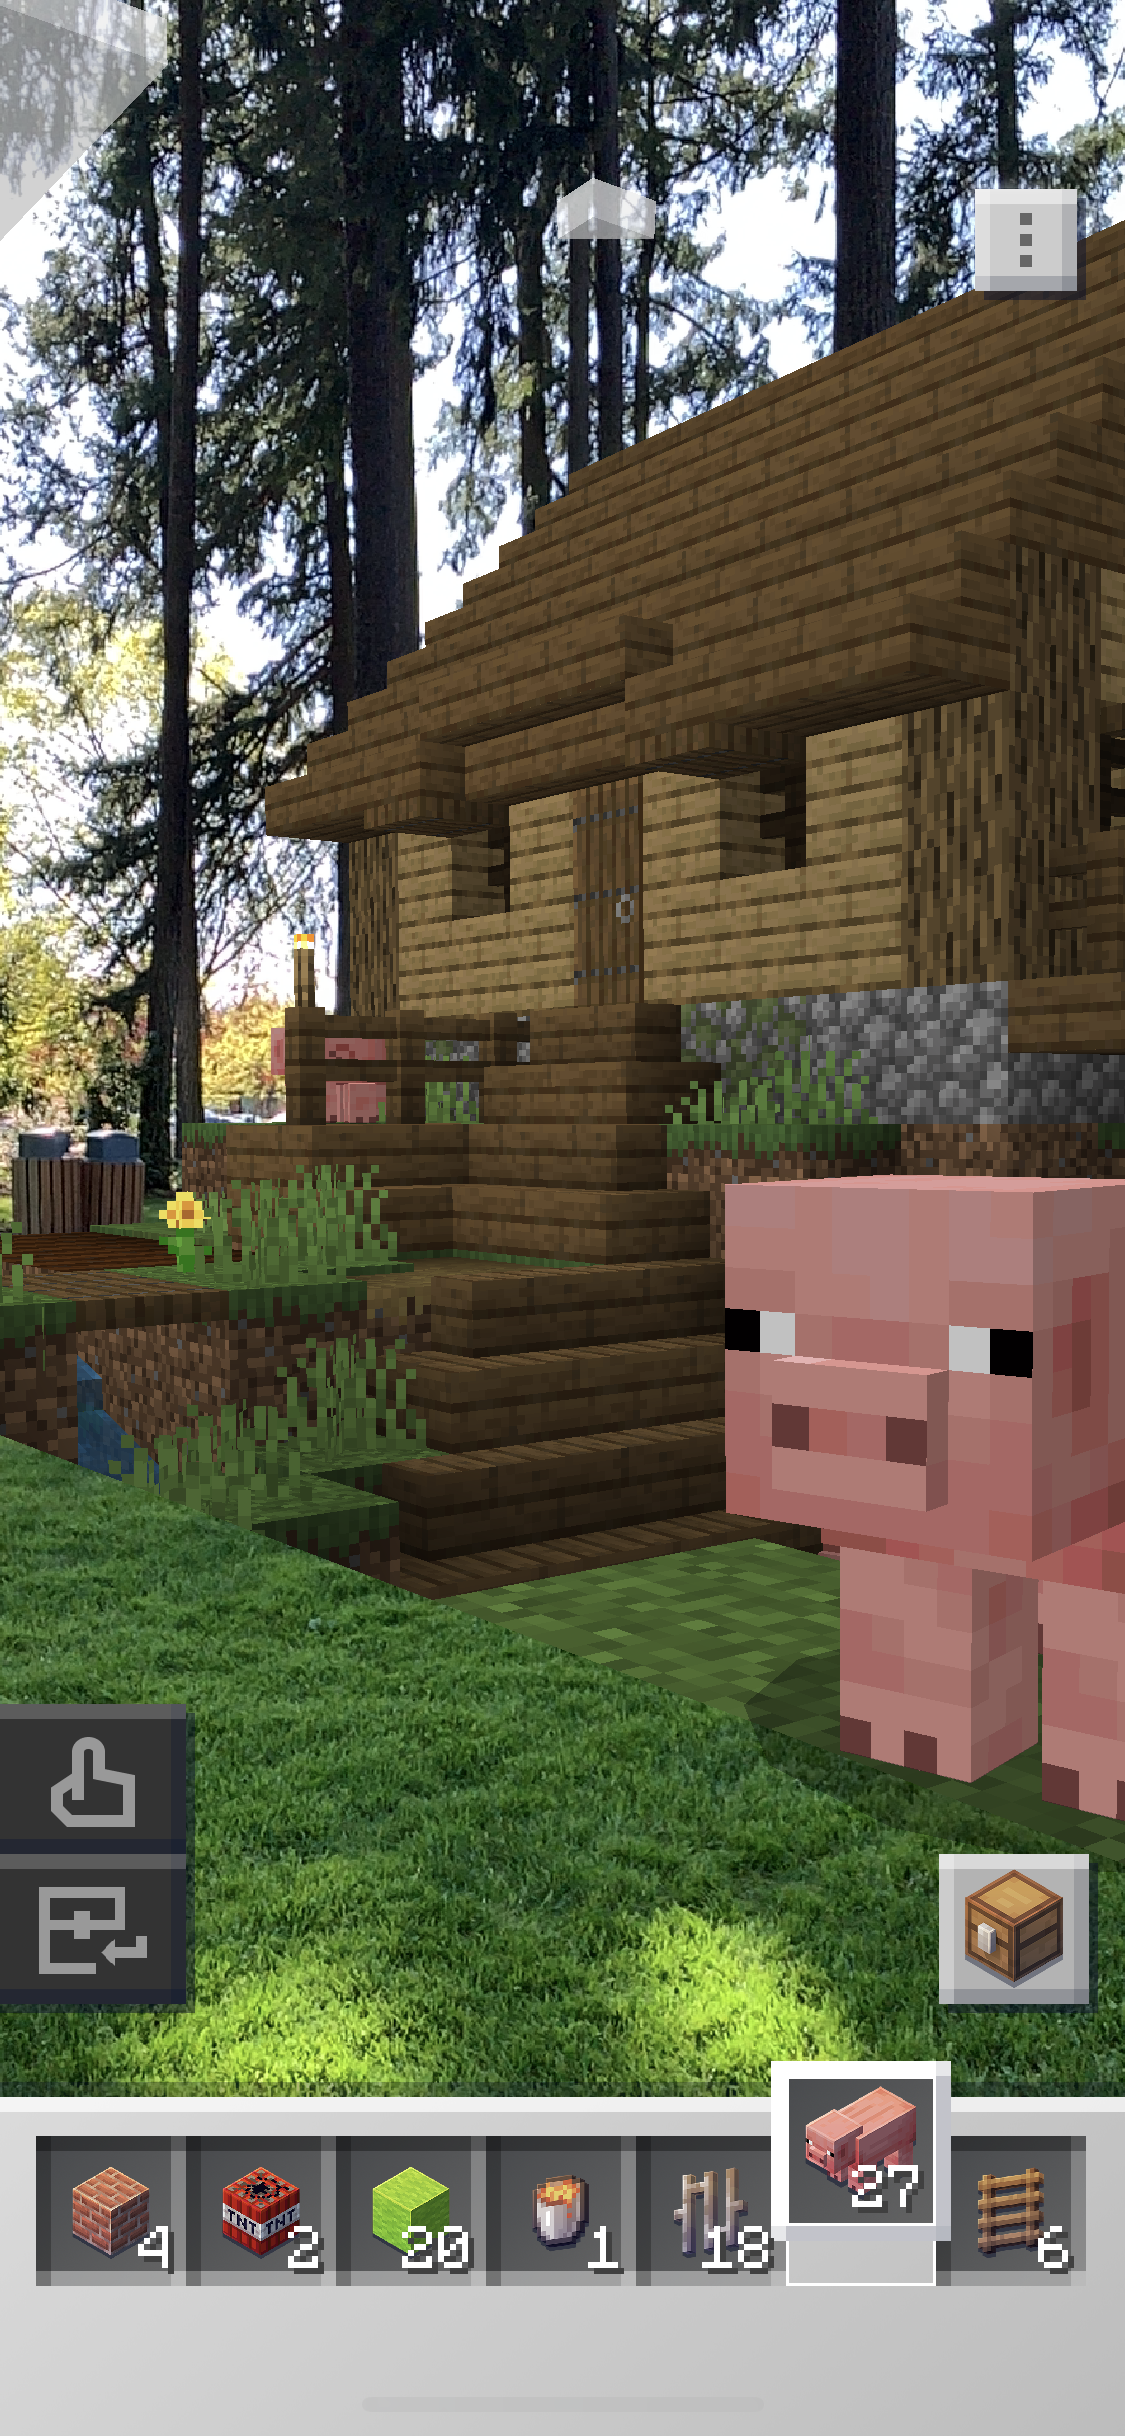 Minecraft Earth on X: Minecraft Earth may be setting off into the